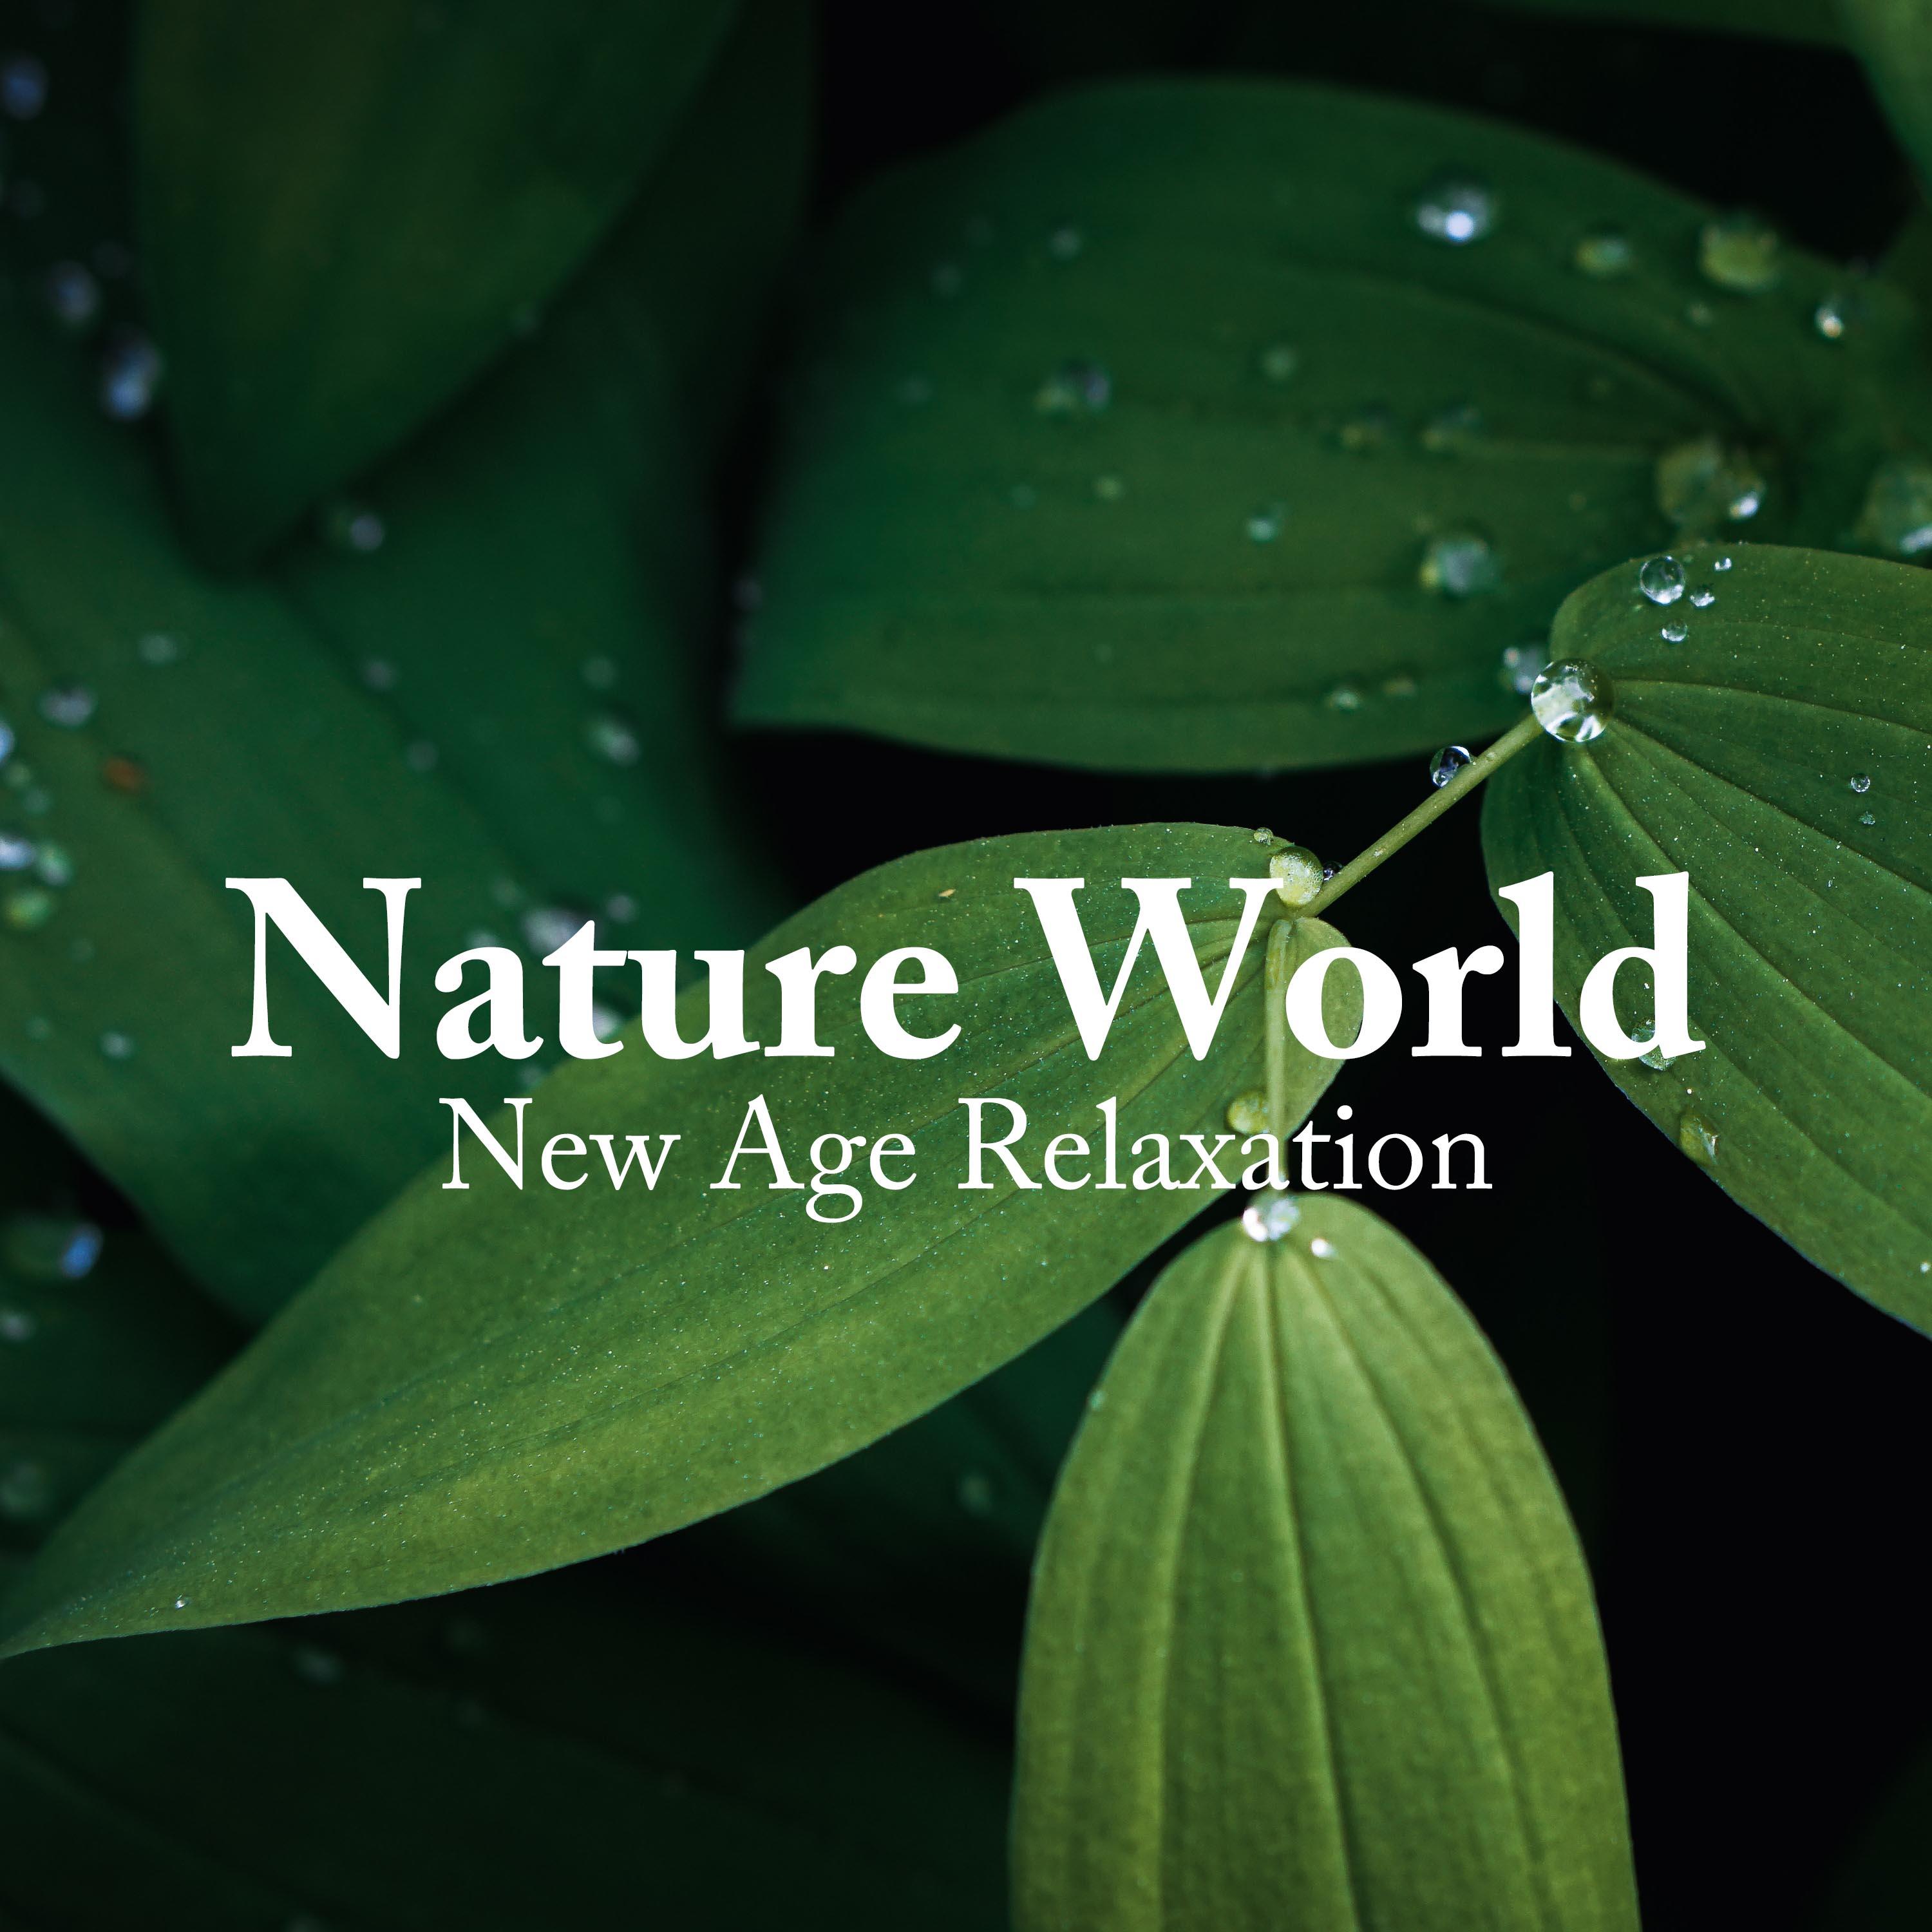 Nature World - New Age Relaxation, Meditation Music for your Well-Being